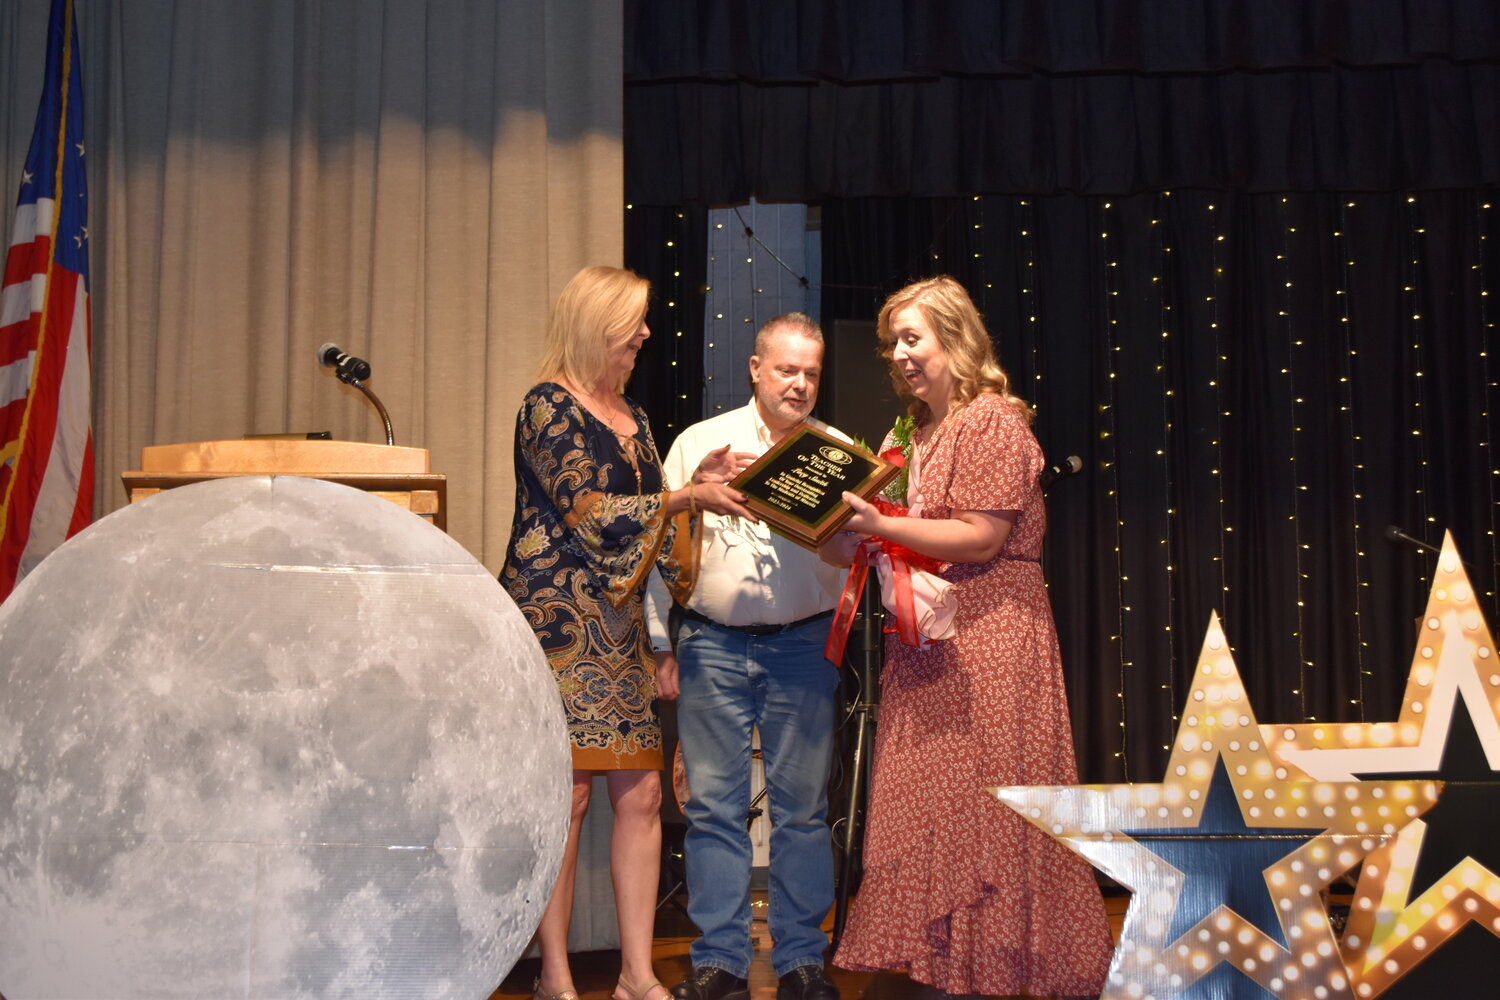 Kiwanis Club members Becky Moore, left, and President Brian Jones present the teacher of the Year Award to Lacy Smith, middle school history teacher, at the chamber of commerce banquet.